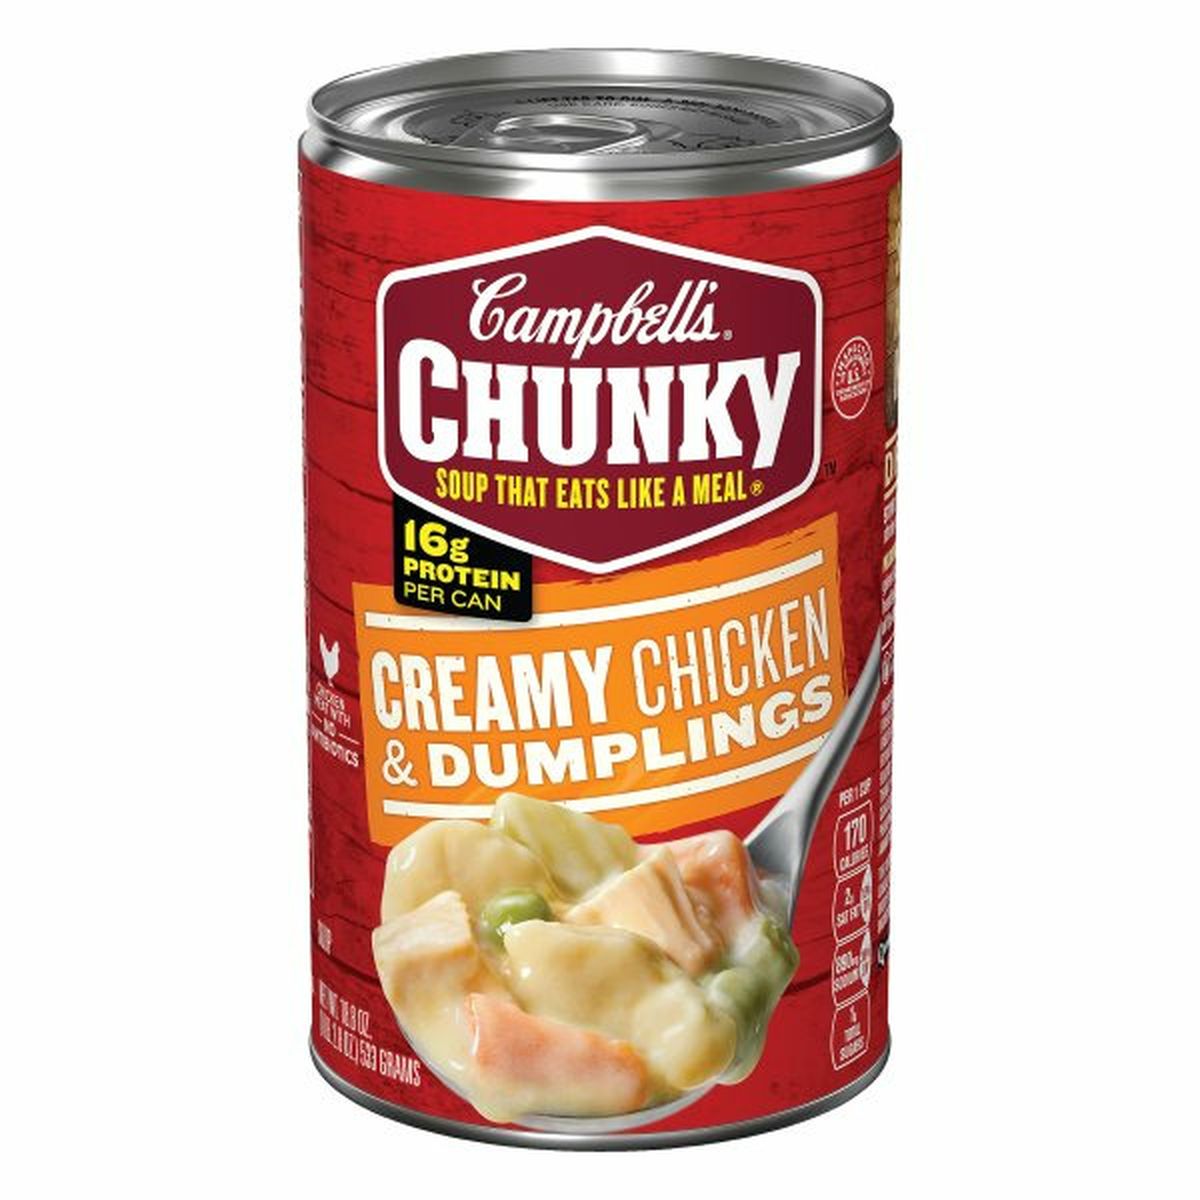 Calories in Campbell'ss Chunkys Soup, Creamy Chicken & Dumplings